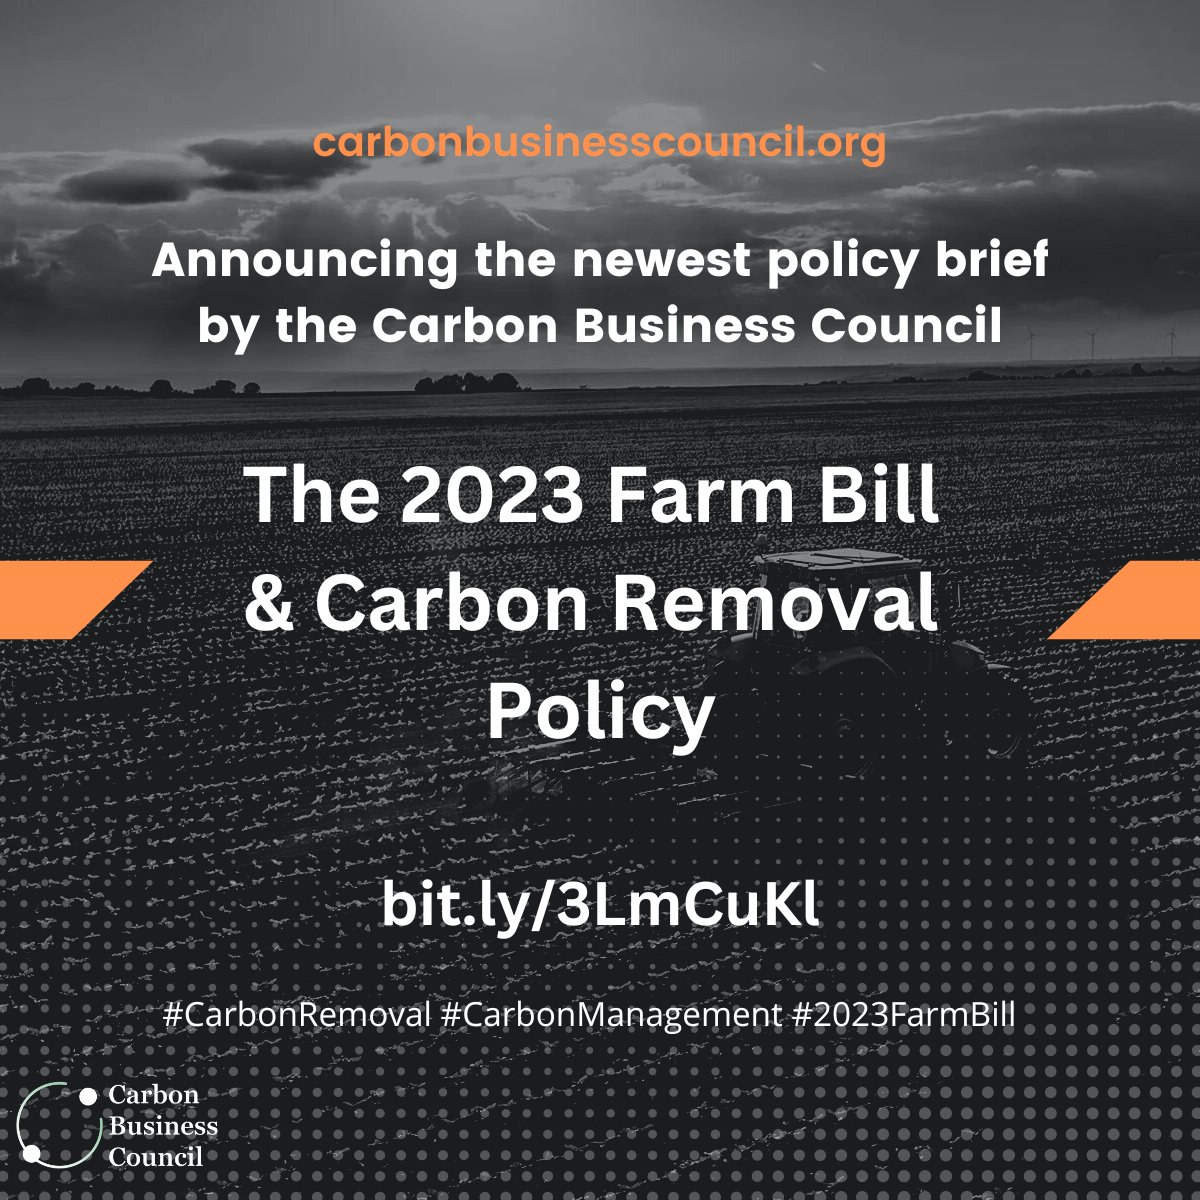 🔥HOT off the press! The Carbon Business Council (@CO2Council) has published a policy brief about #carbonremoval + the #2023FarmBill. This legislation, updated every 5 years, represents a huge opportunity to support farmers and ecosystems. Read the brief: carbonbusinesscouncil.org/news/farmbill